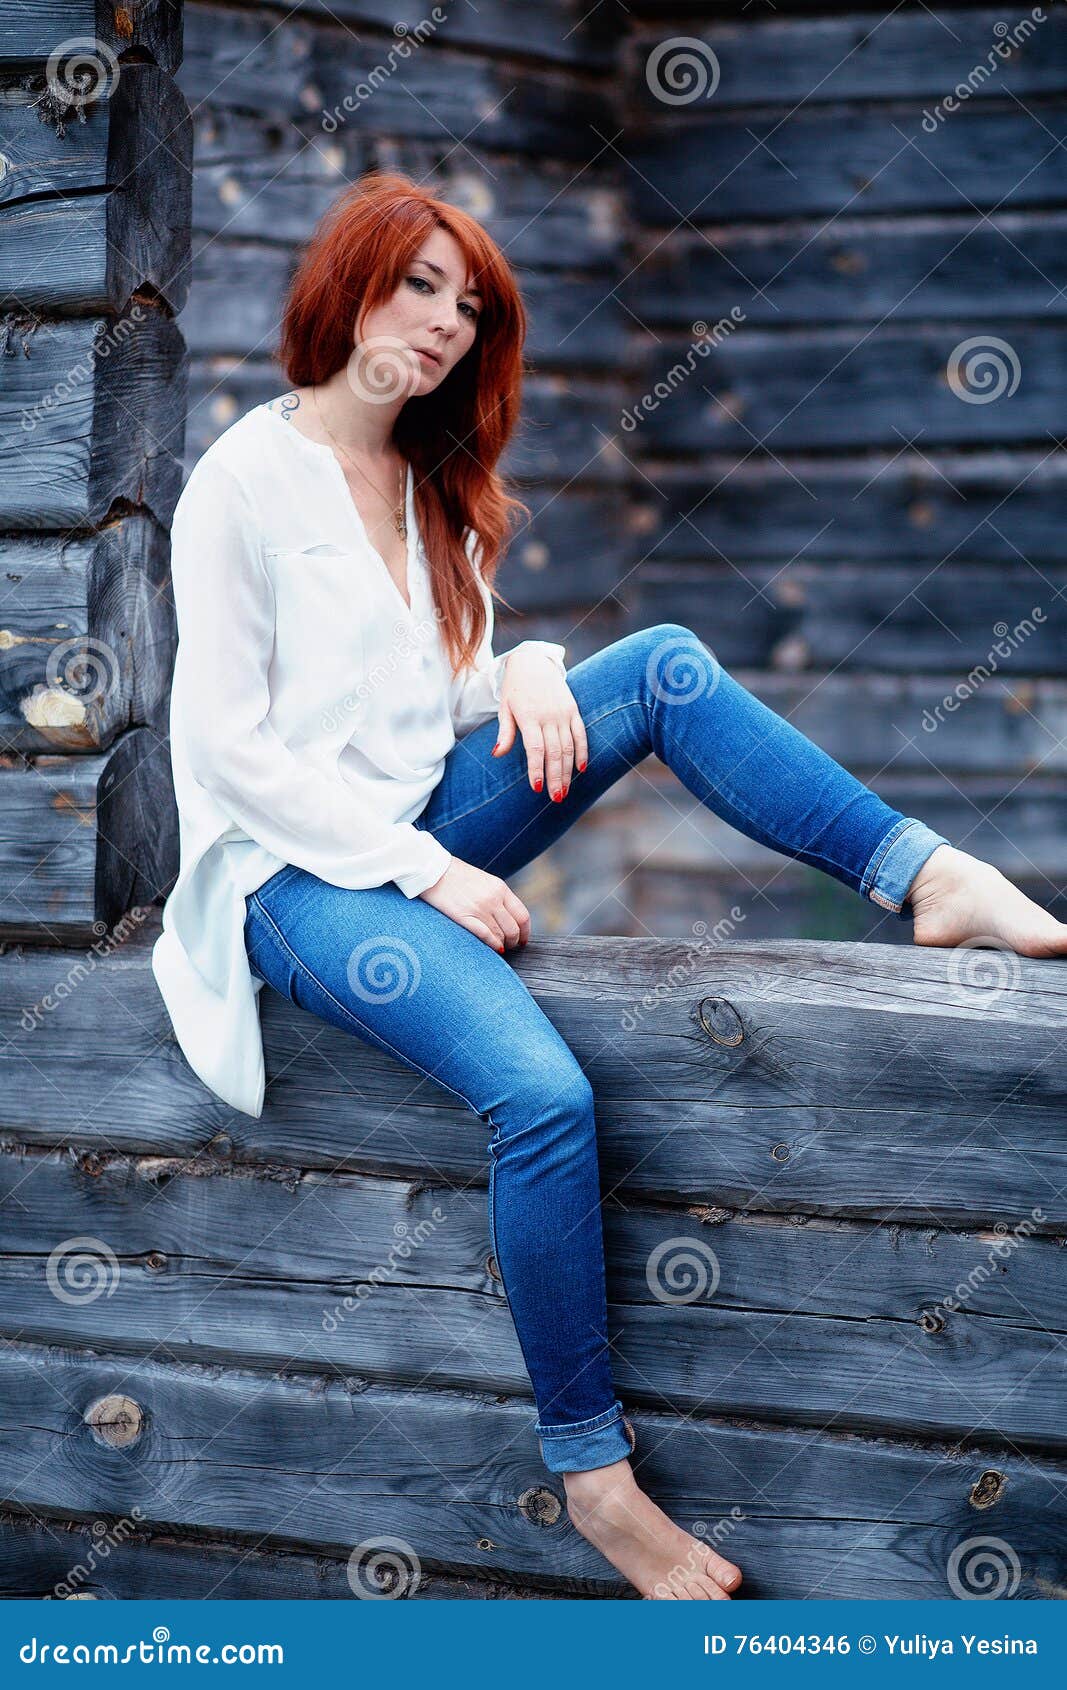 White Shirt And Blue Jeans Stock Photo 